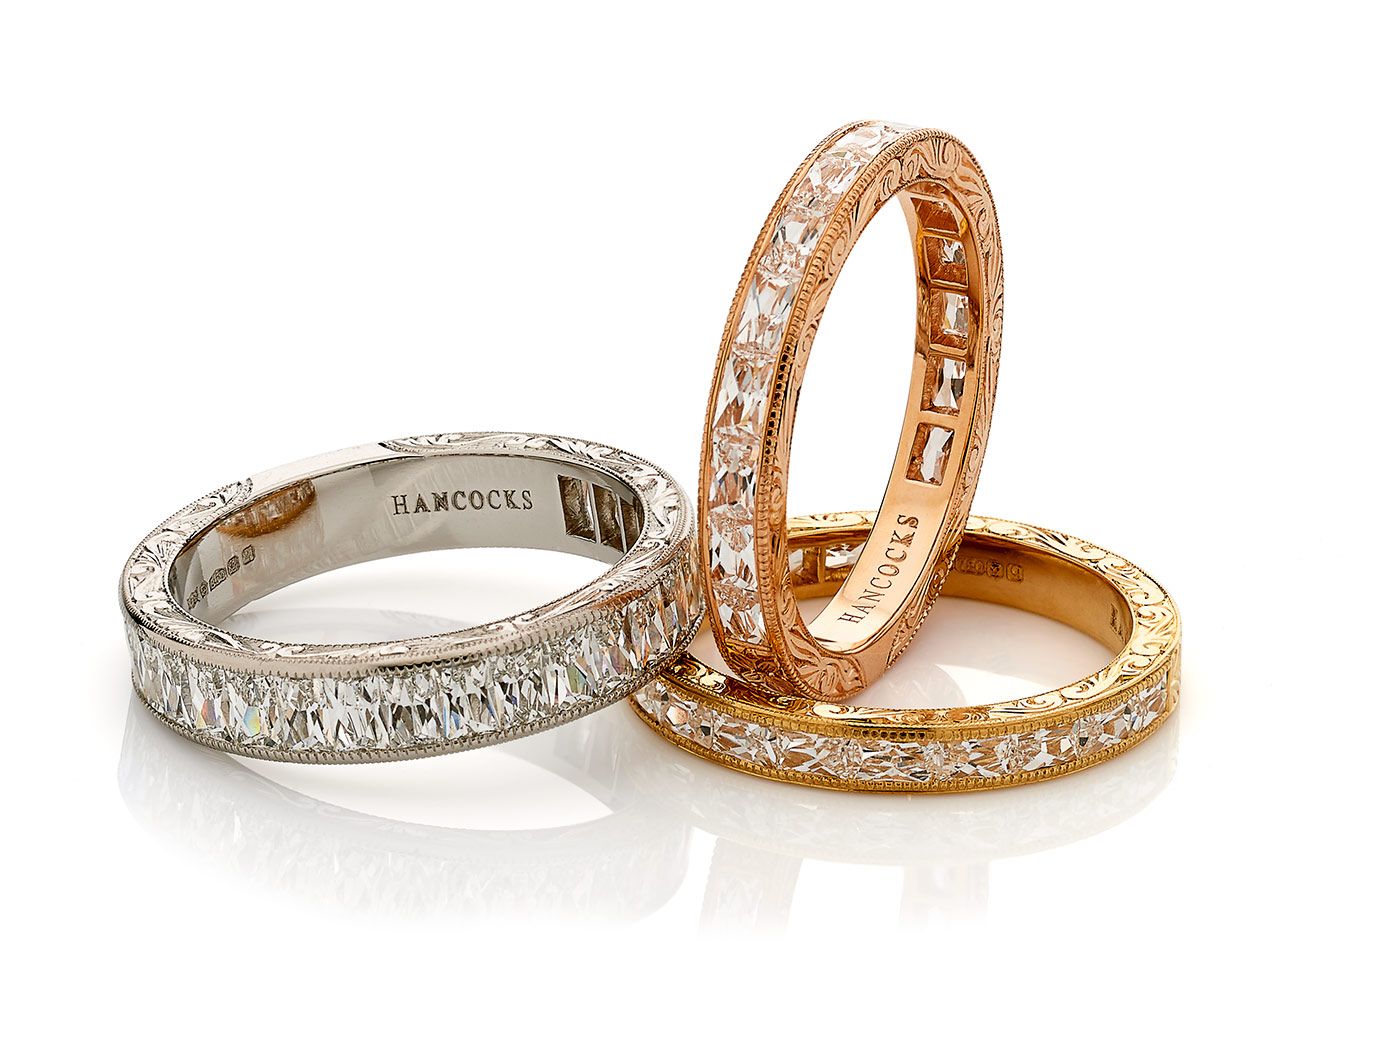 Selection of Hancocks rings in gold, white gold, rose gold and diamonds